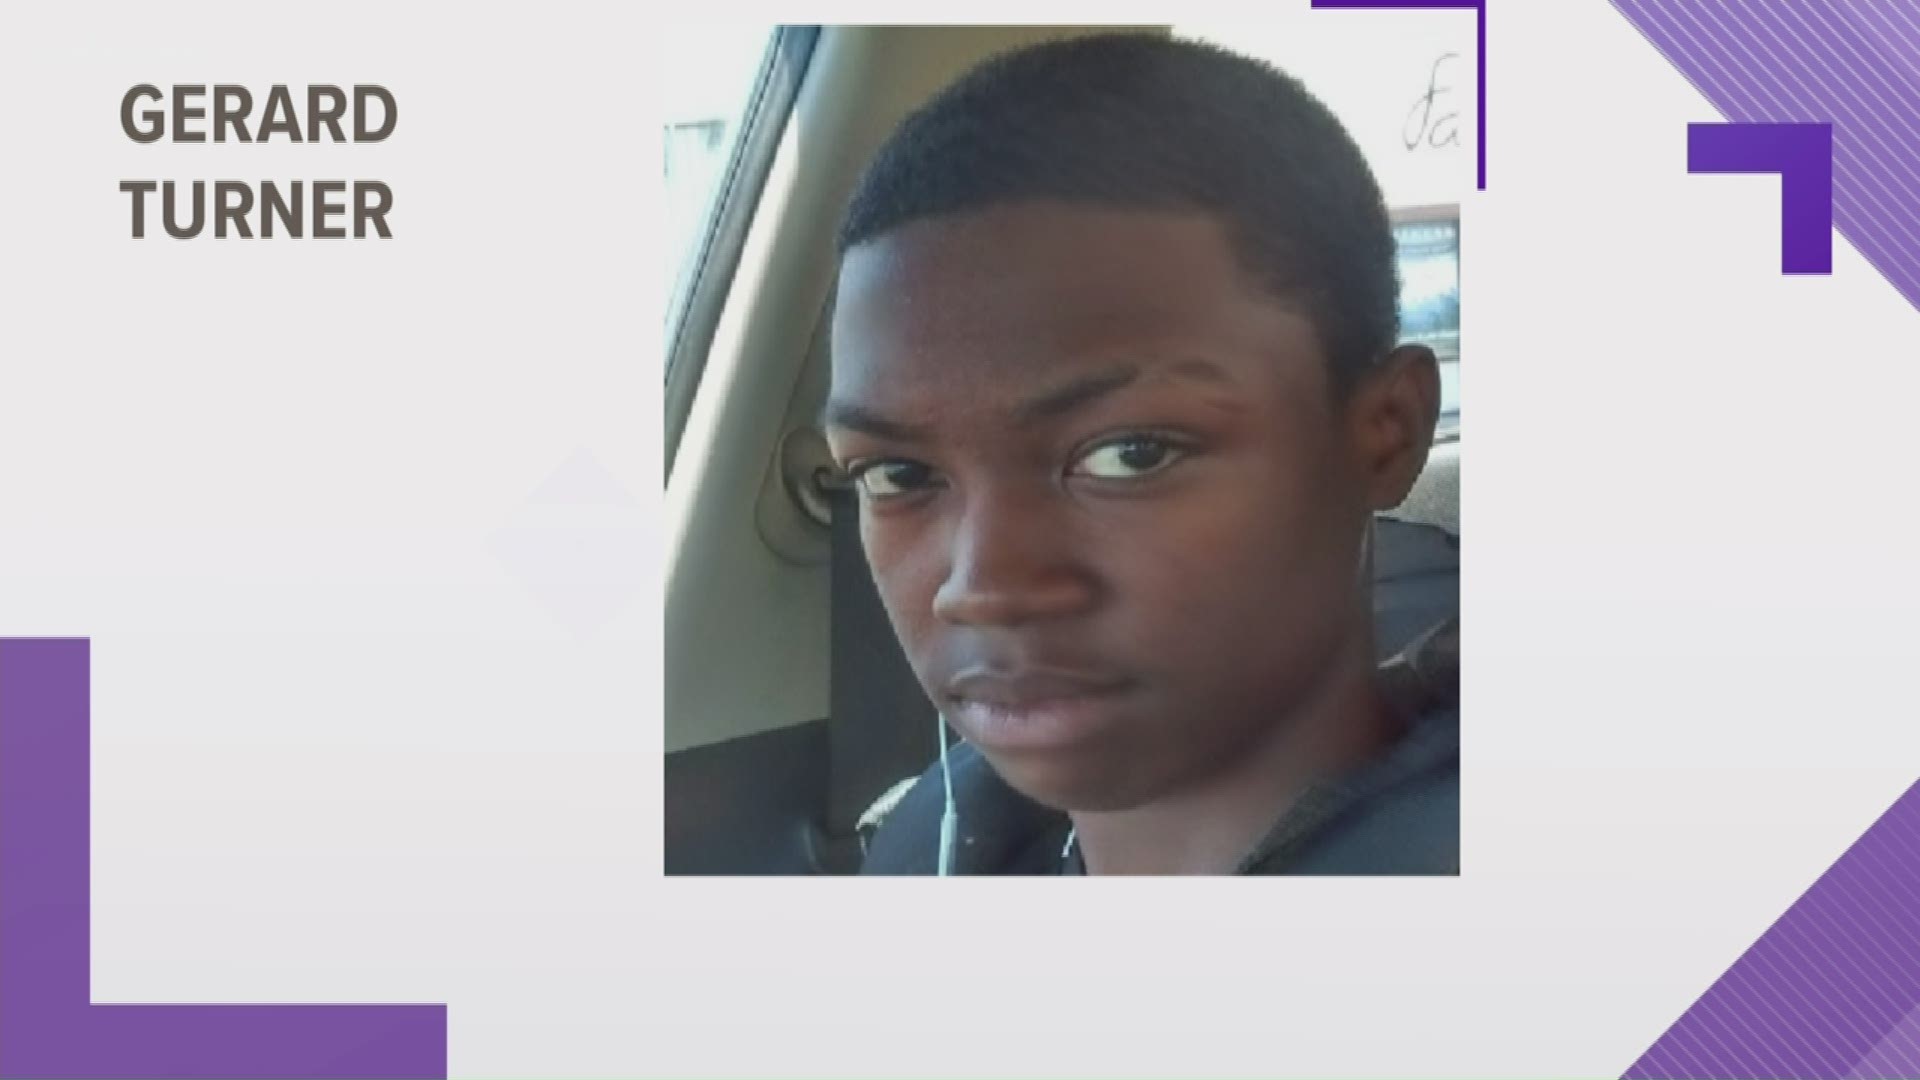 The boy was last seen on Friday, June 16.